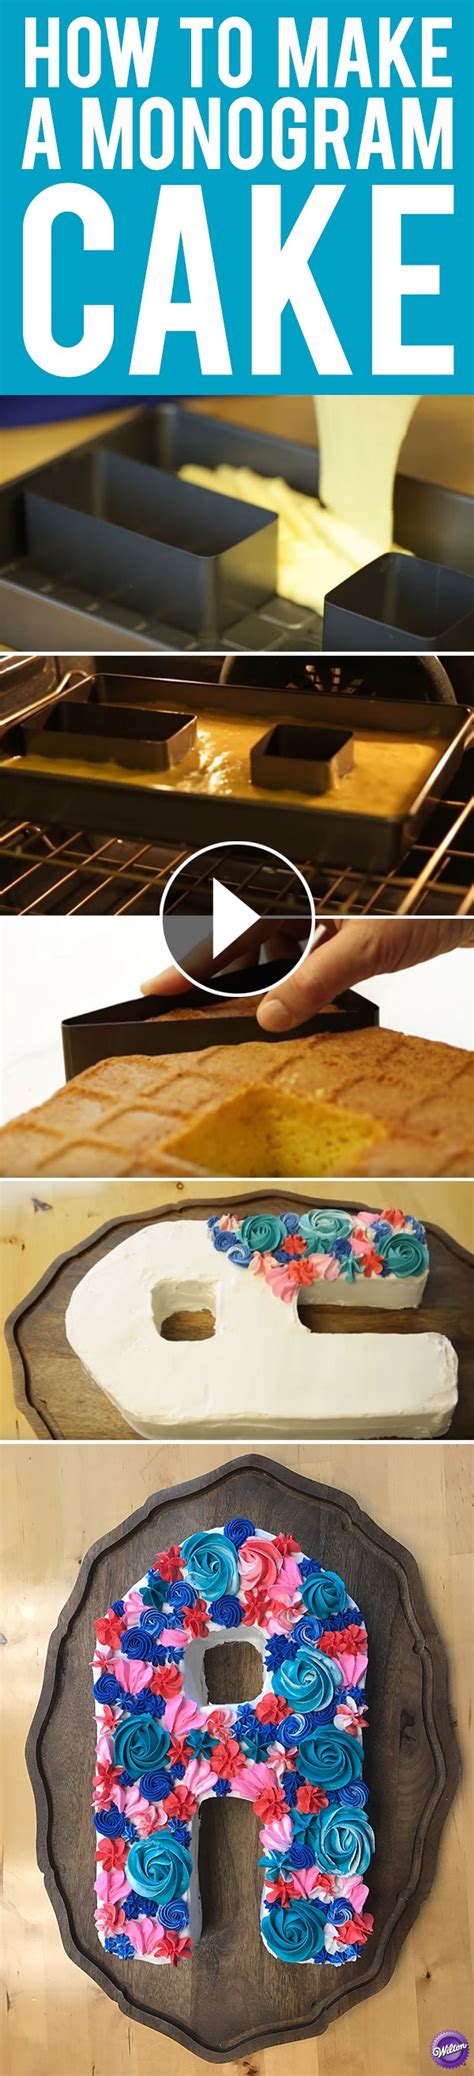 We know that the focal issue here is how to make toaster strudel icing. Learn how to make a monogram cake to personalize a great ...